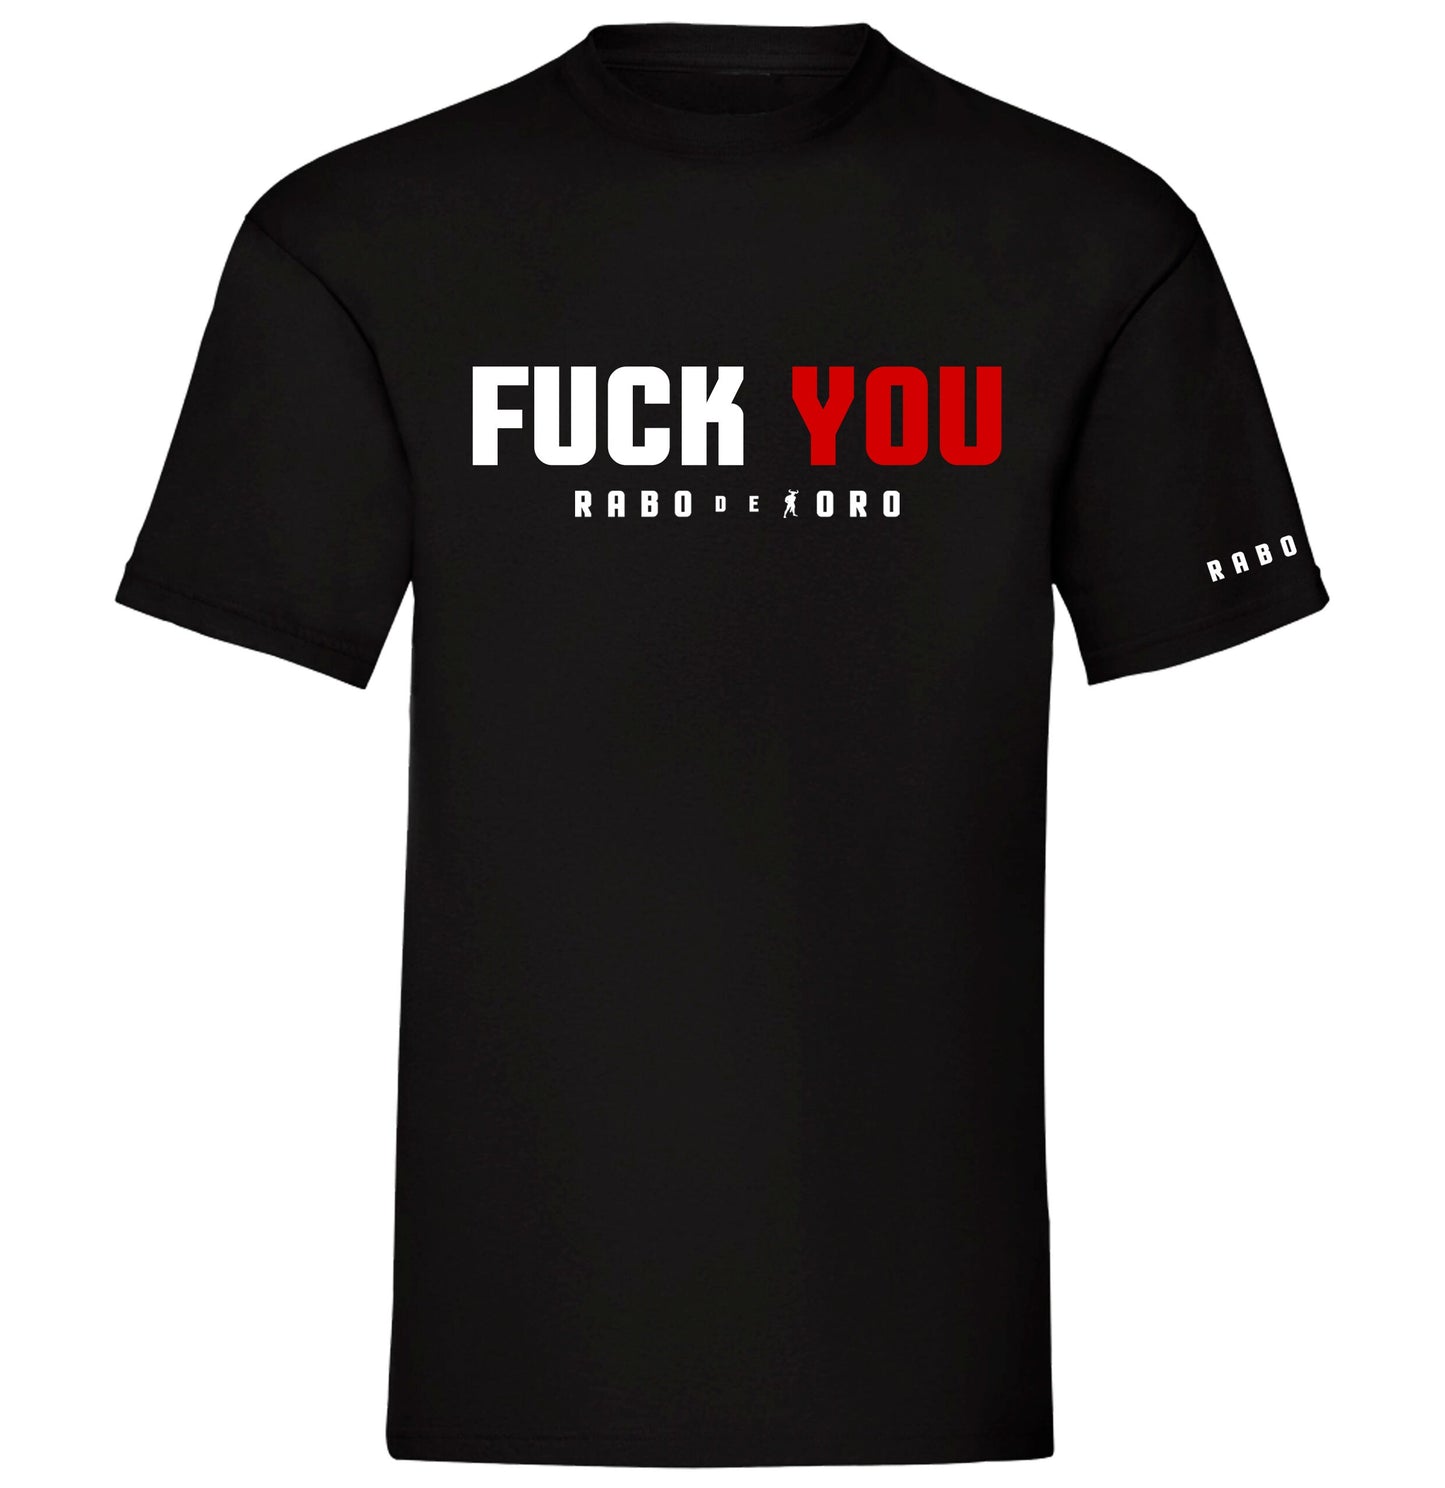 FUCK YOU/ME Double Sided Black T-Shirt with White & Red details